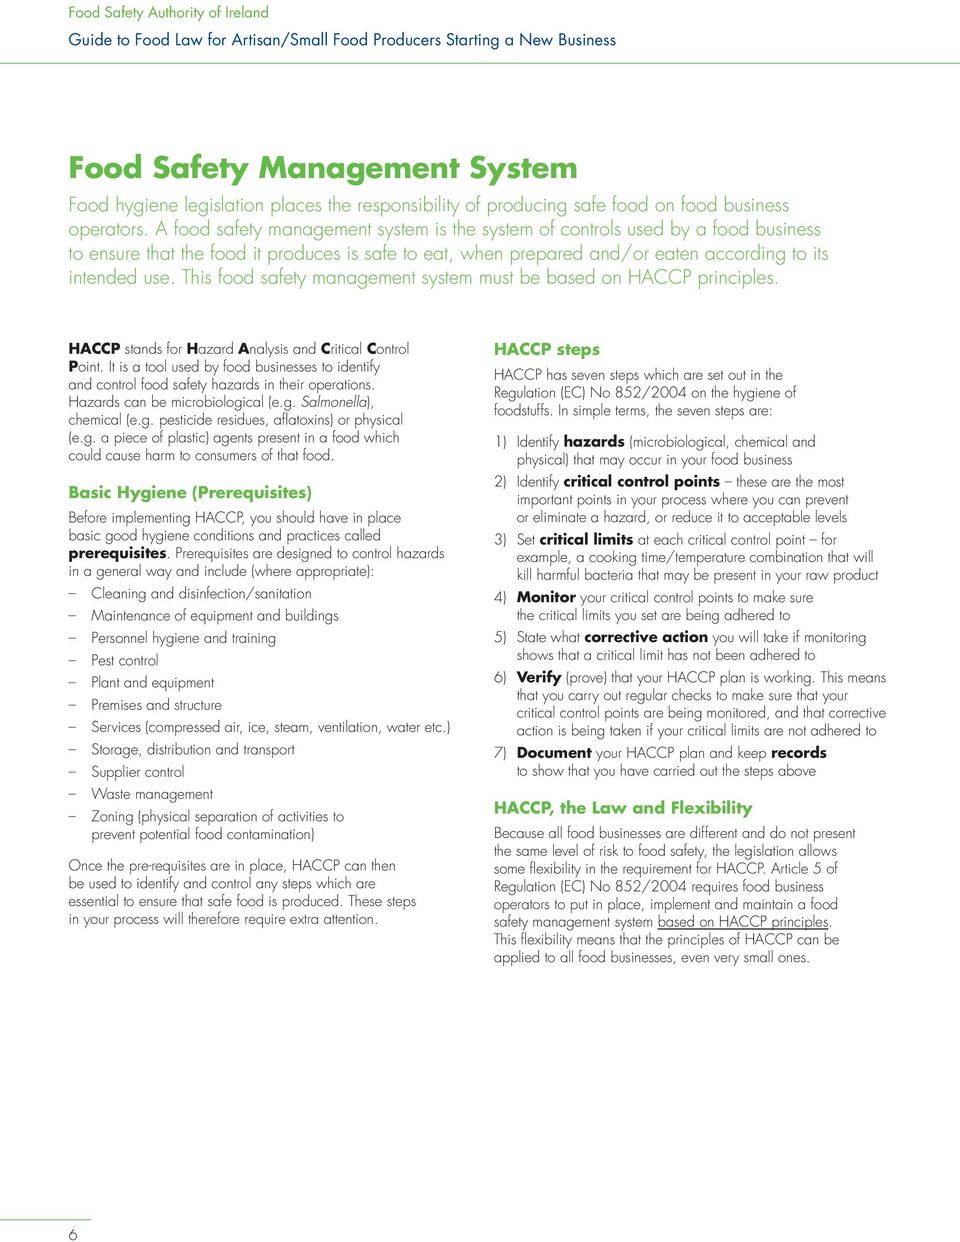 A food safety management system is the system of controls used by a food business to ensure that the food it produces is safe to eat, when prepared and/or eaten according to its intended use.